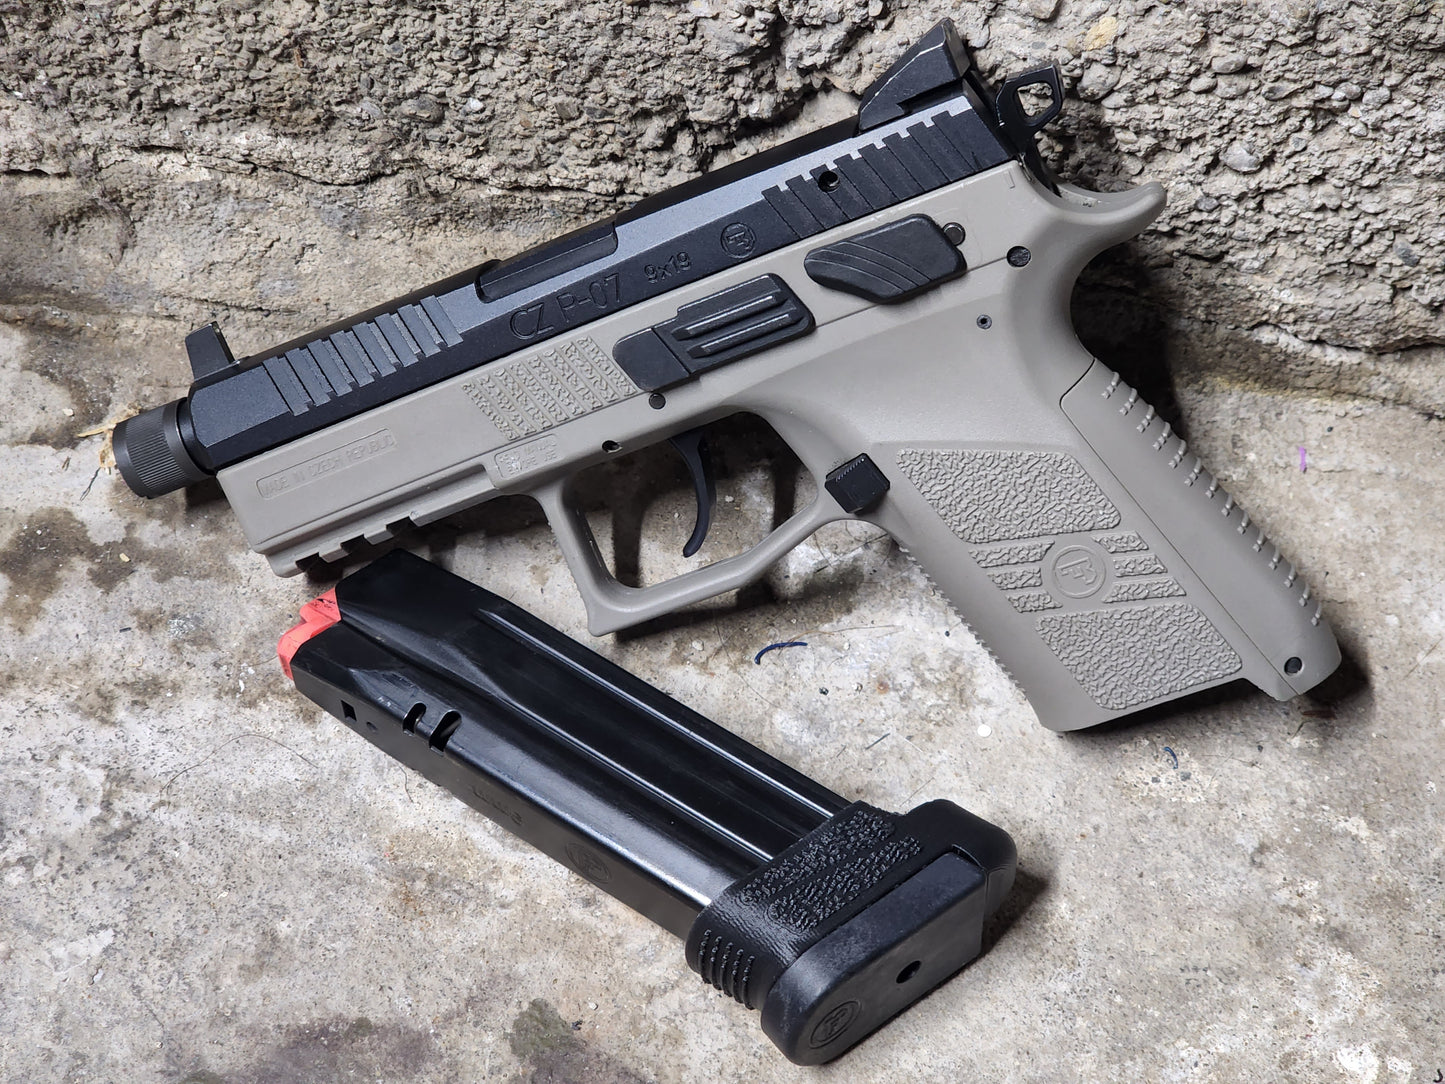 Run the CZ P07 adapter sleeve to get the most versatility out of your P07 with 19 round magazines